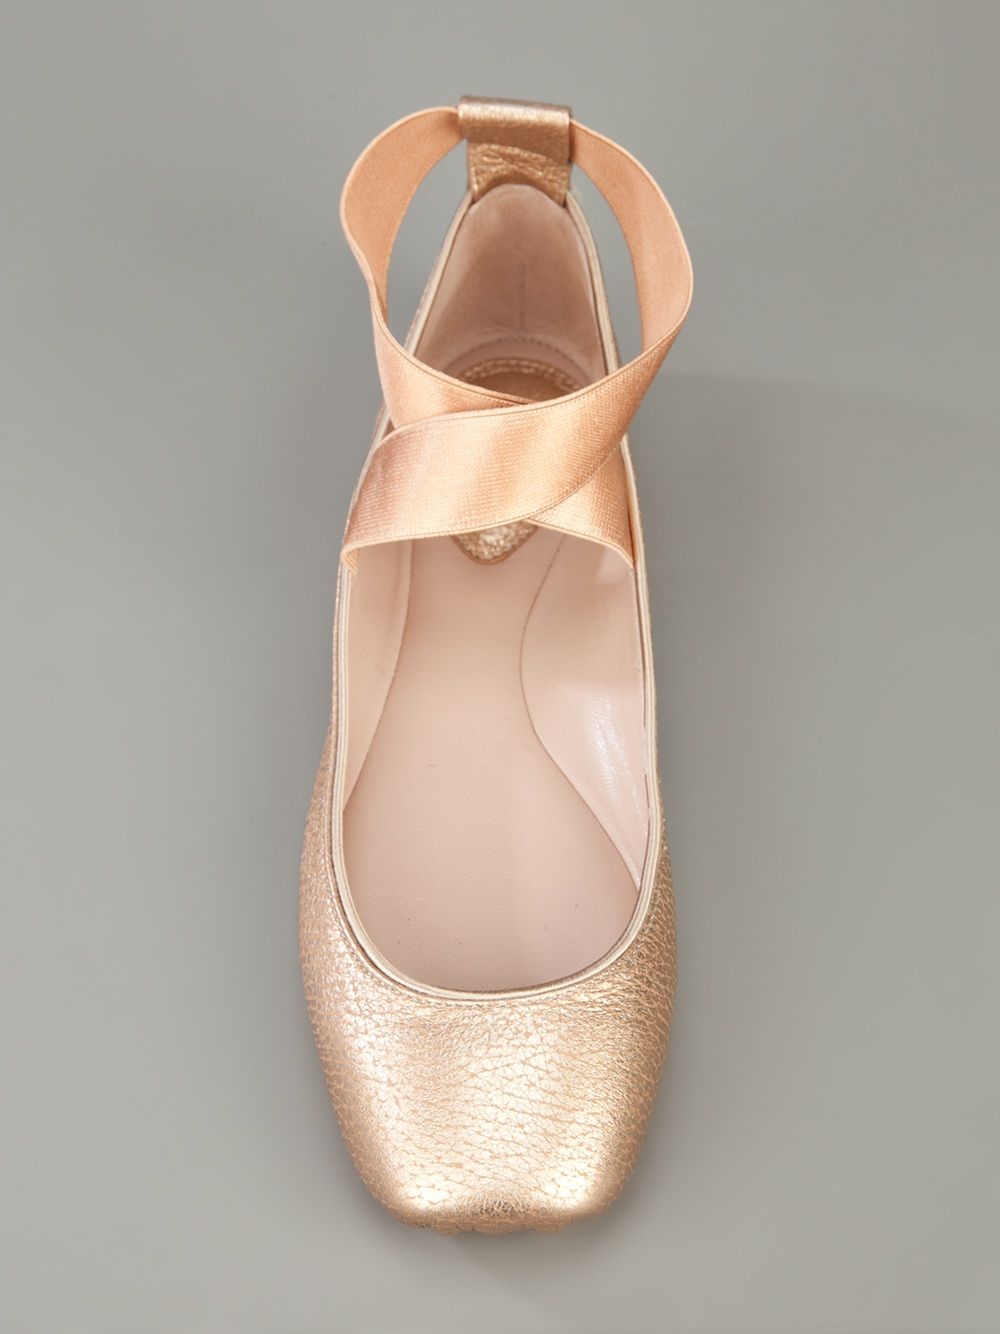 Flats made to look like pointe shoes!